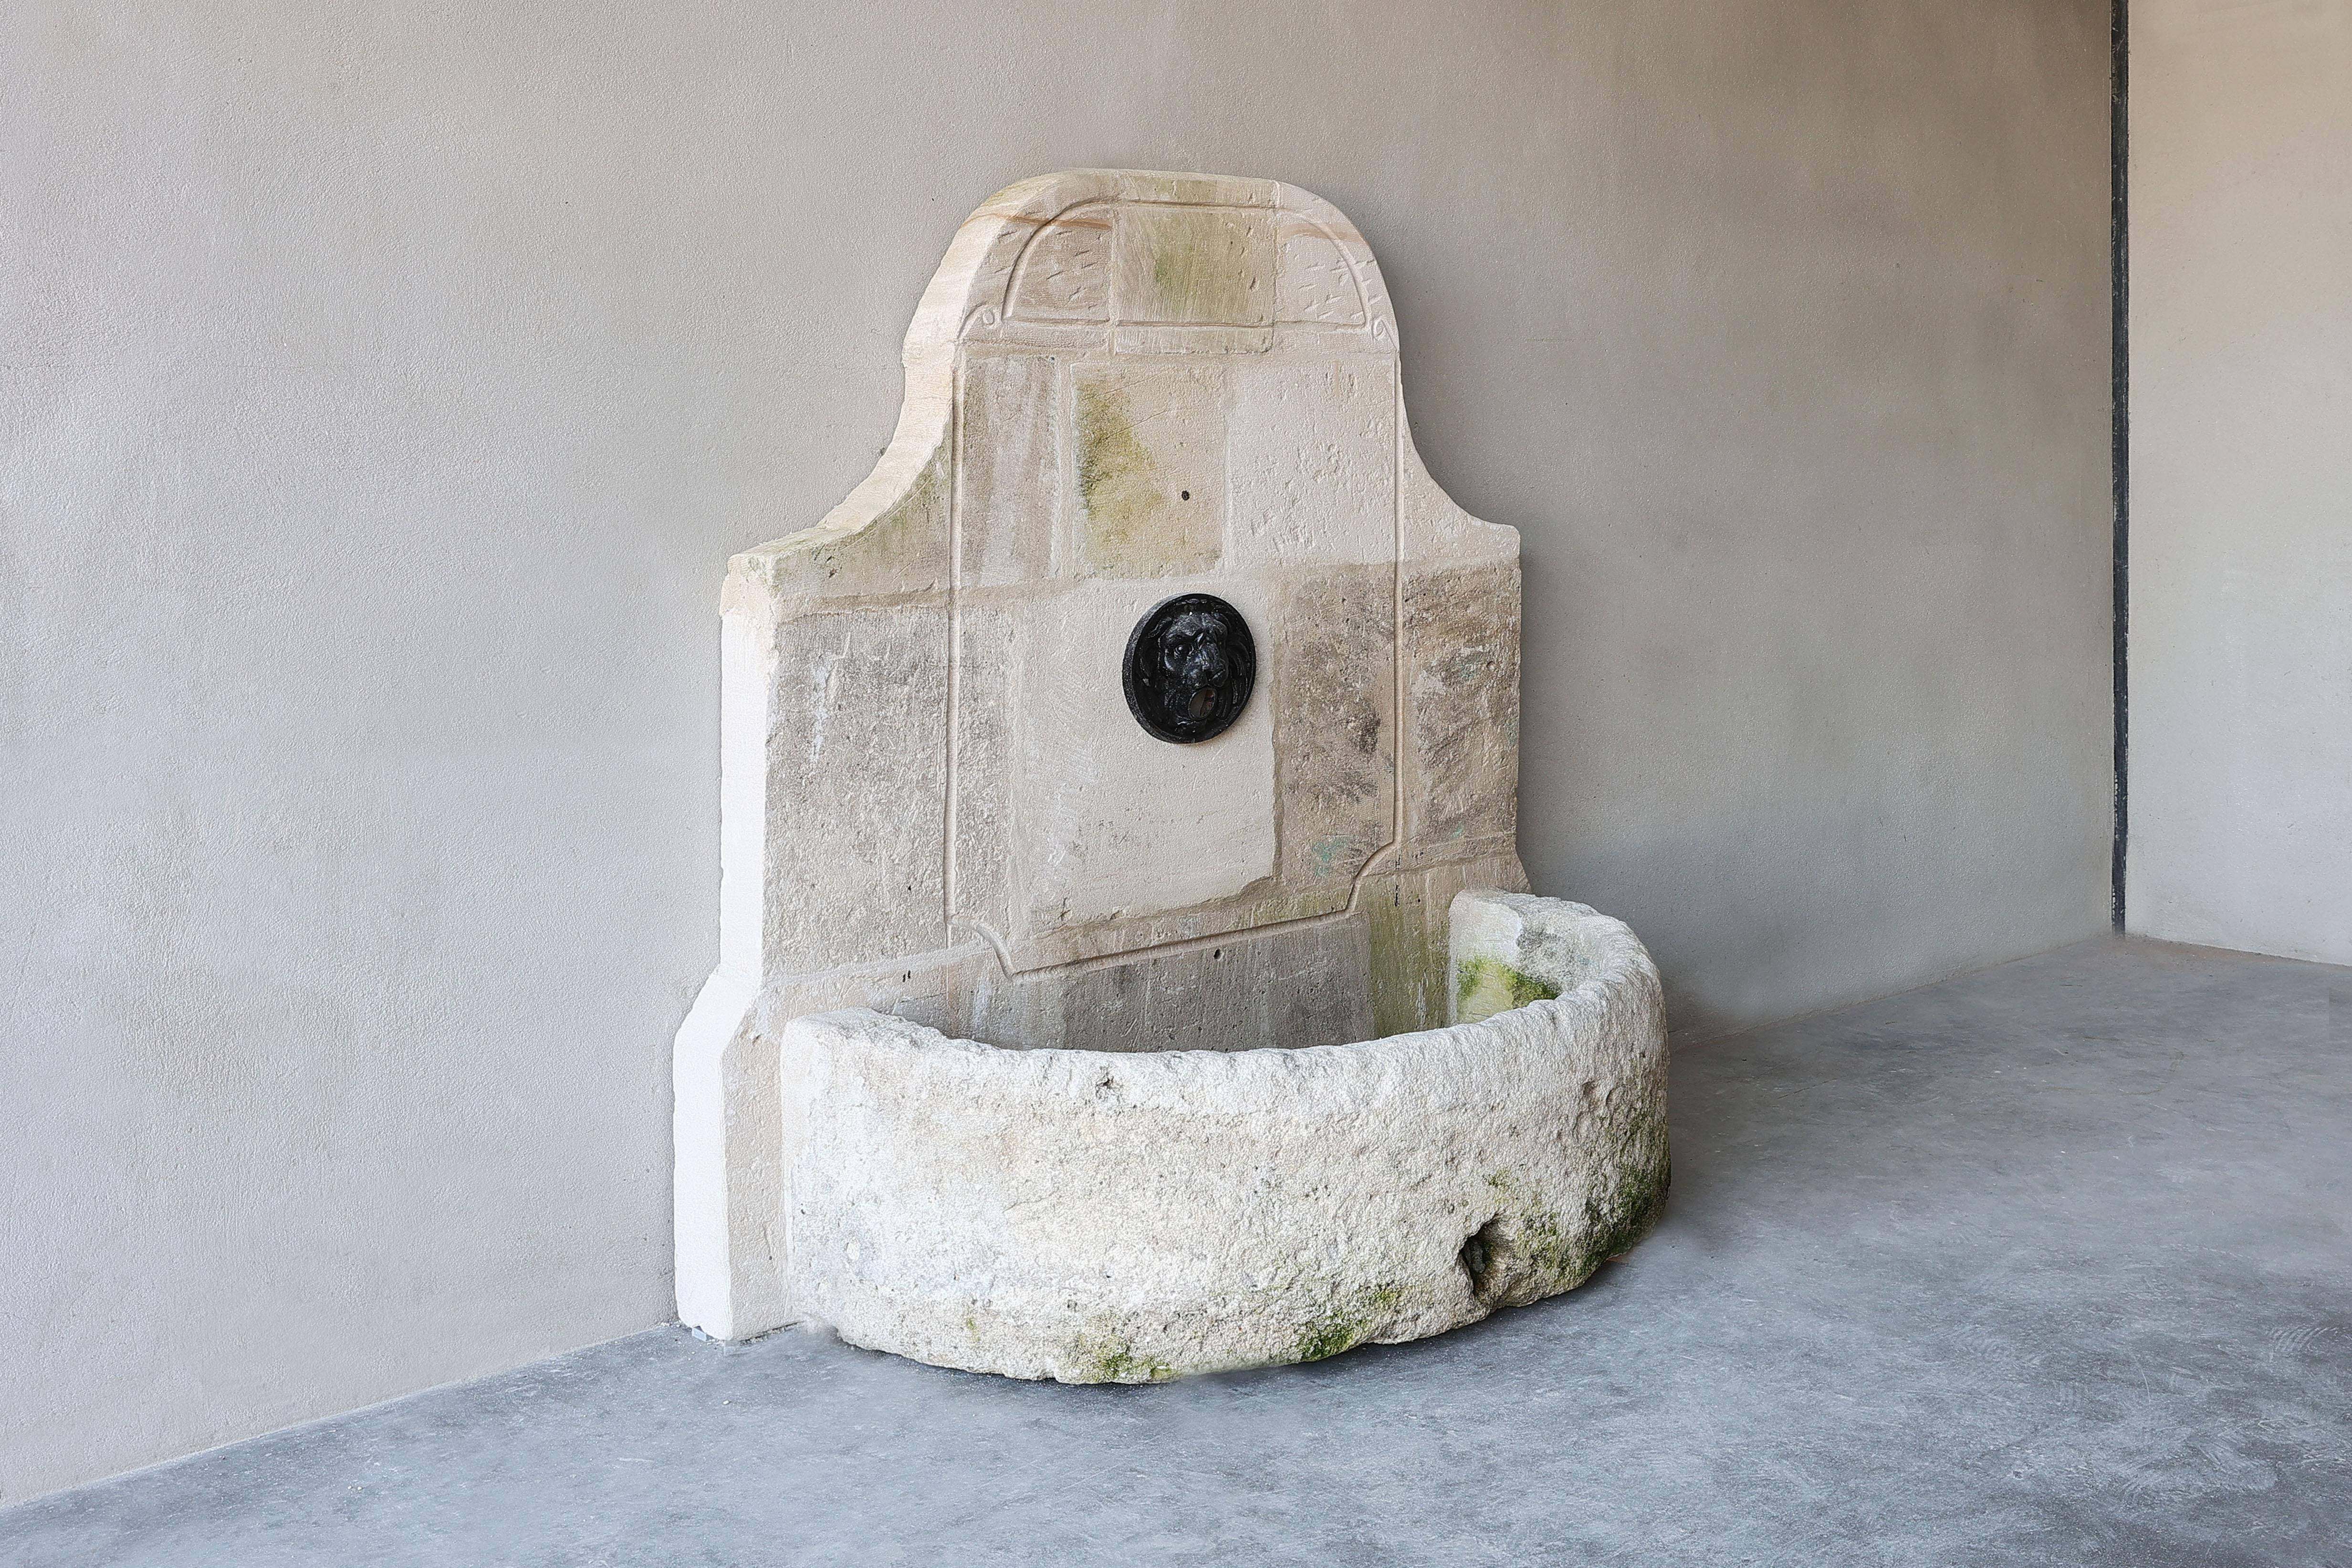 Antique wall fountain of French limestone from the 19th century. A beautiful piece we took from the Burgundy region in France. Very nice item to put in the garden or veranda.